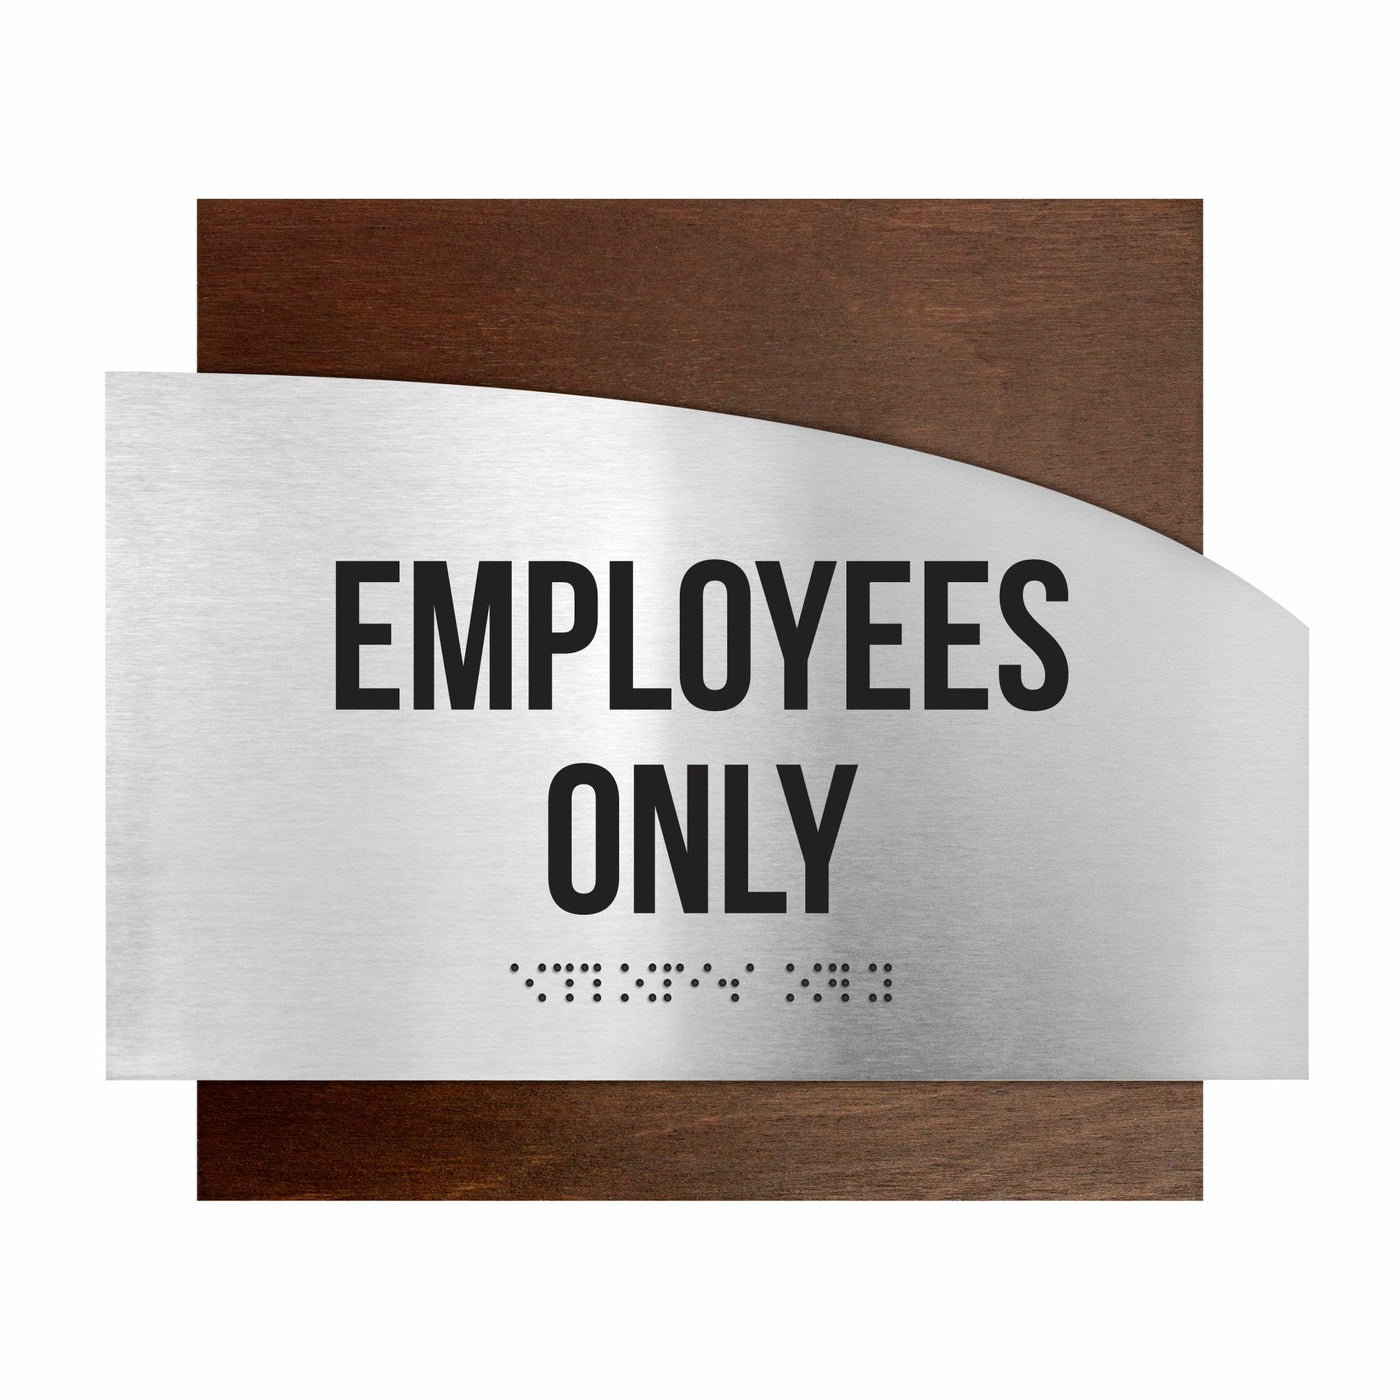 Door Signs - Employees Only Sign - Stainless Steel & Wood - "Wave" Design